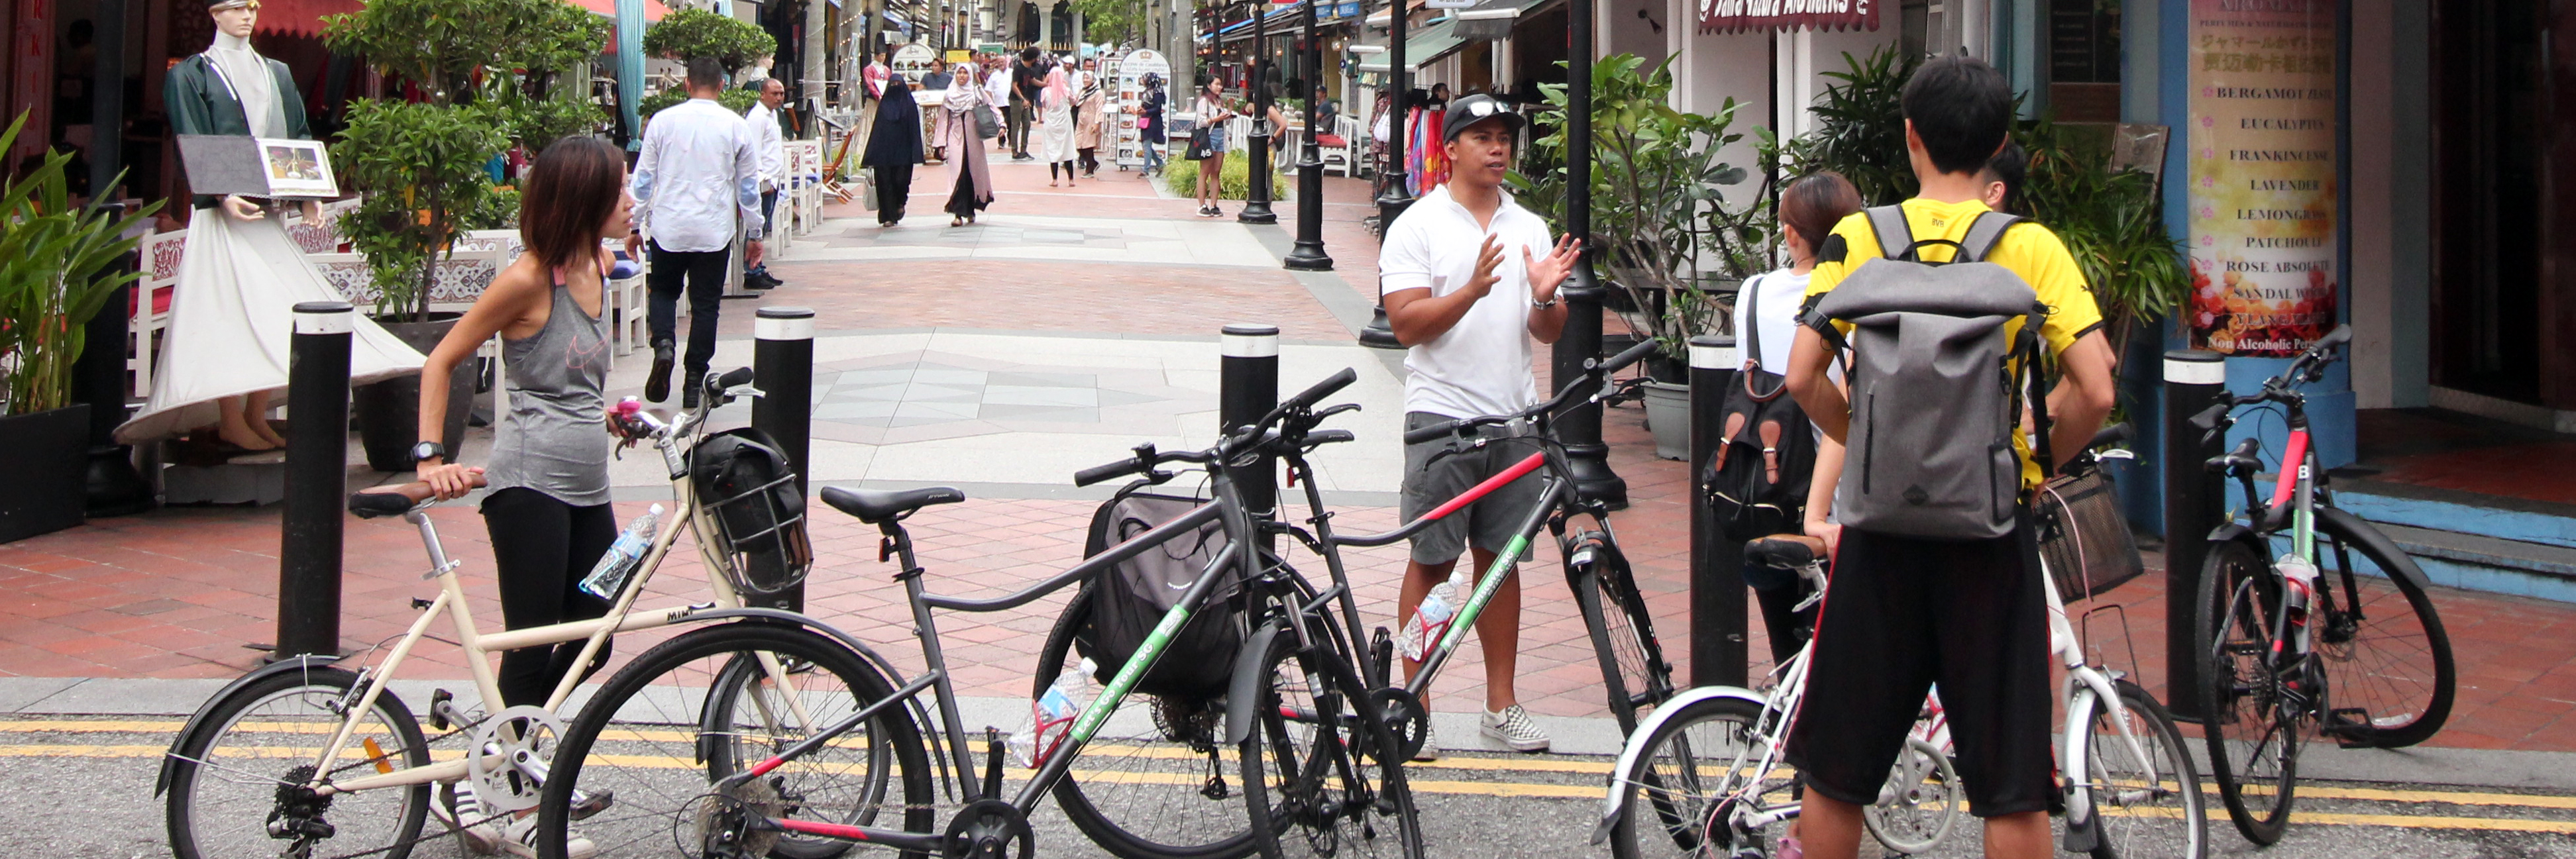 Bike around Singapore's backstreets with Let's Go Bike Singapore. Photo by Lin Yanqin